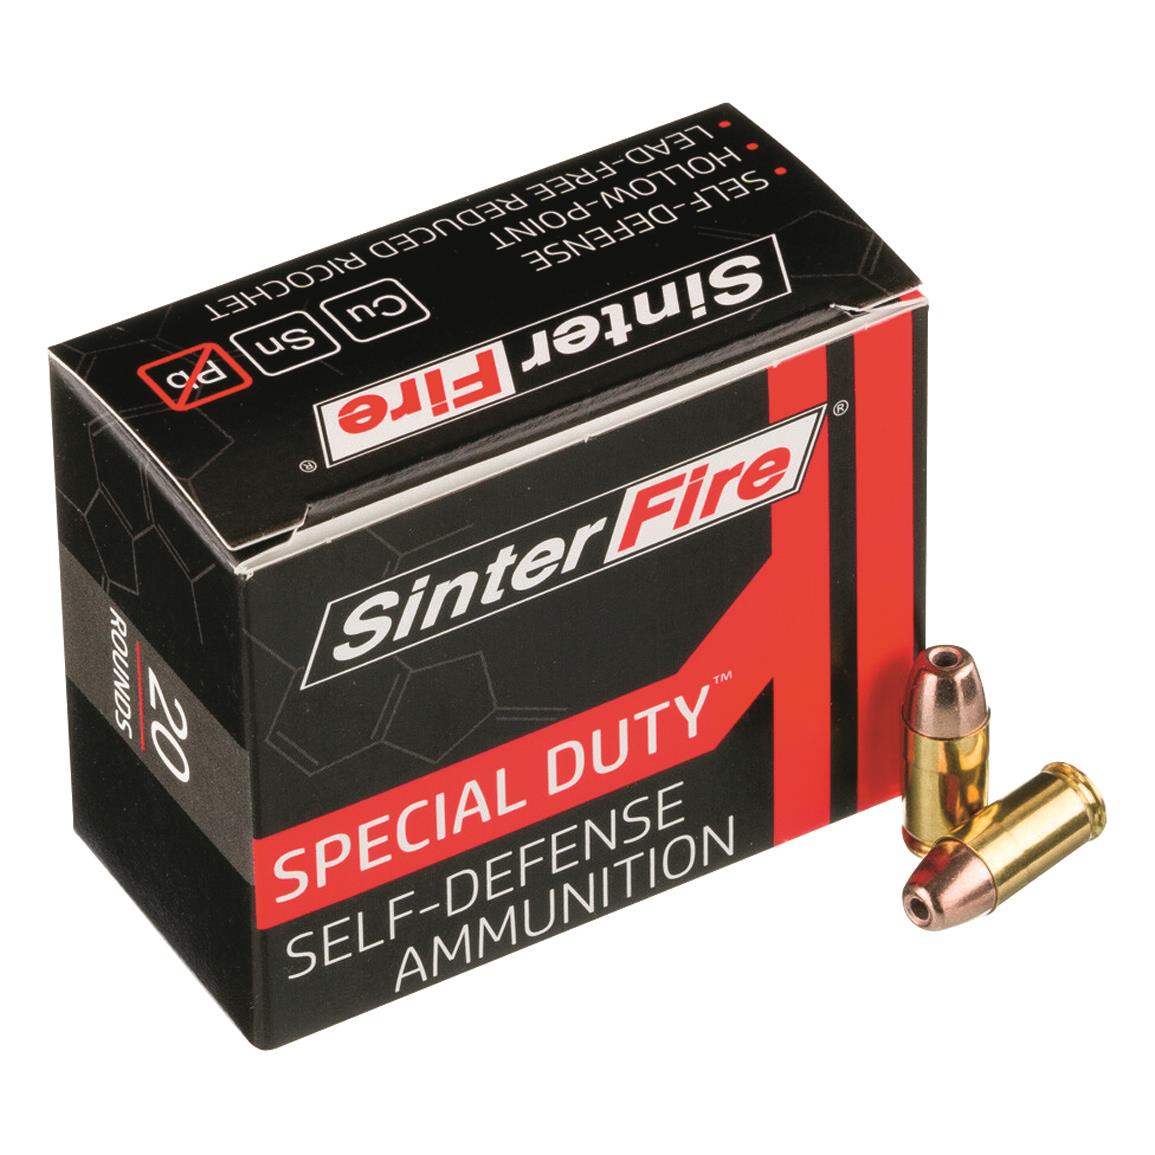 SinterFire Special Duty Lead-Free Frangible, .380 ACP, Hollow Point, 75 Grain, 20 Rounds